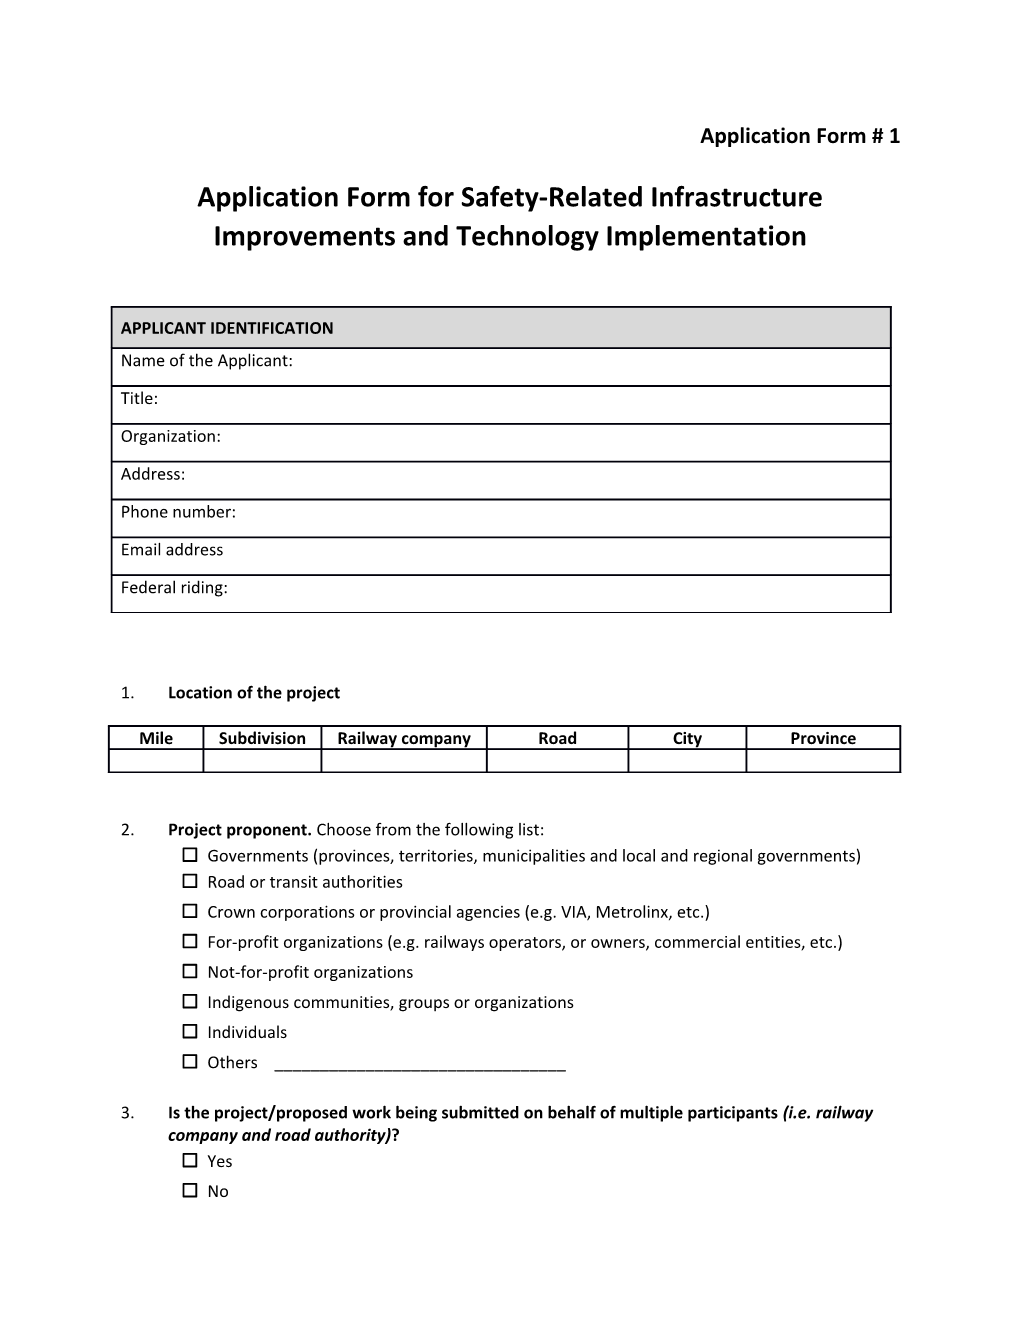 Application Form for Safety-Related Infrastructure Improvements and Technology Implementation